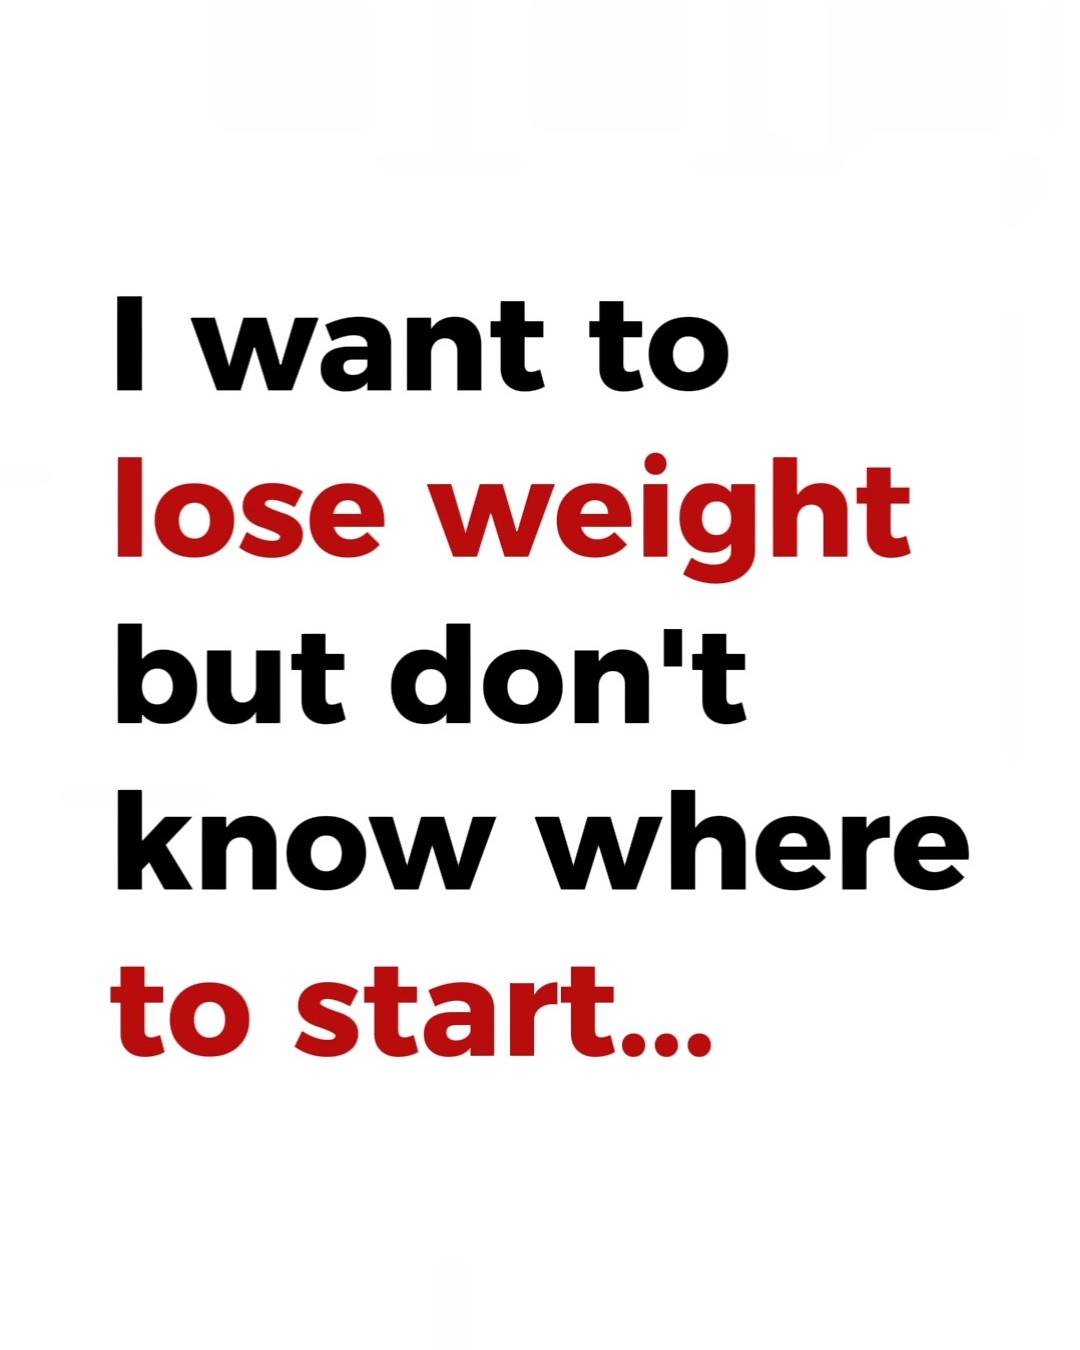 i want to lose weight but i don't know where to get started